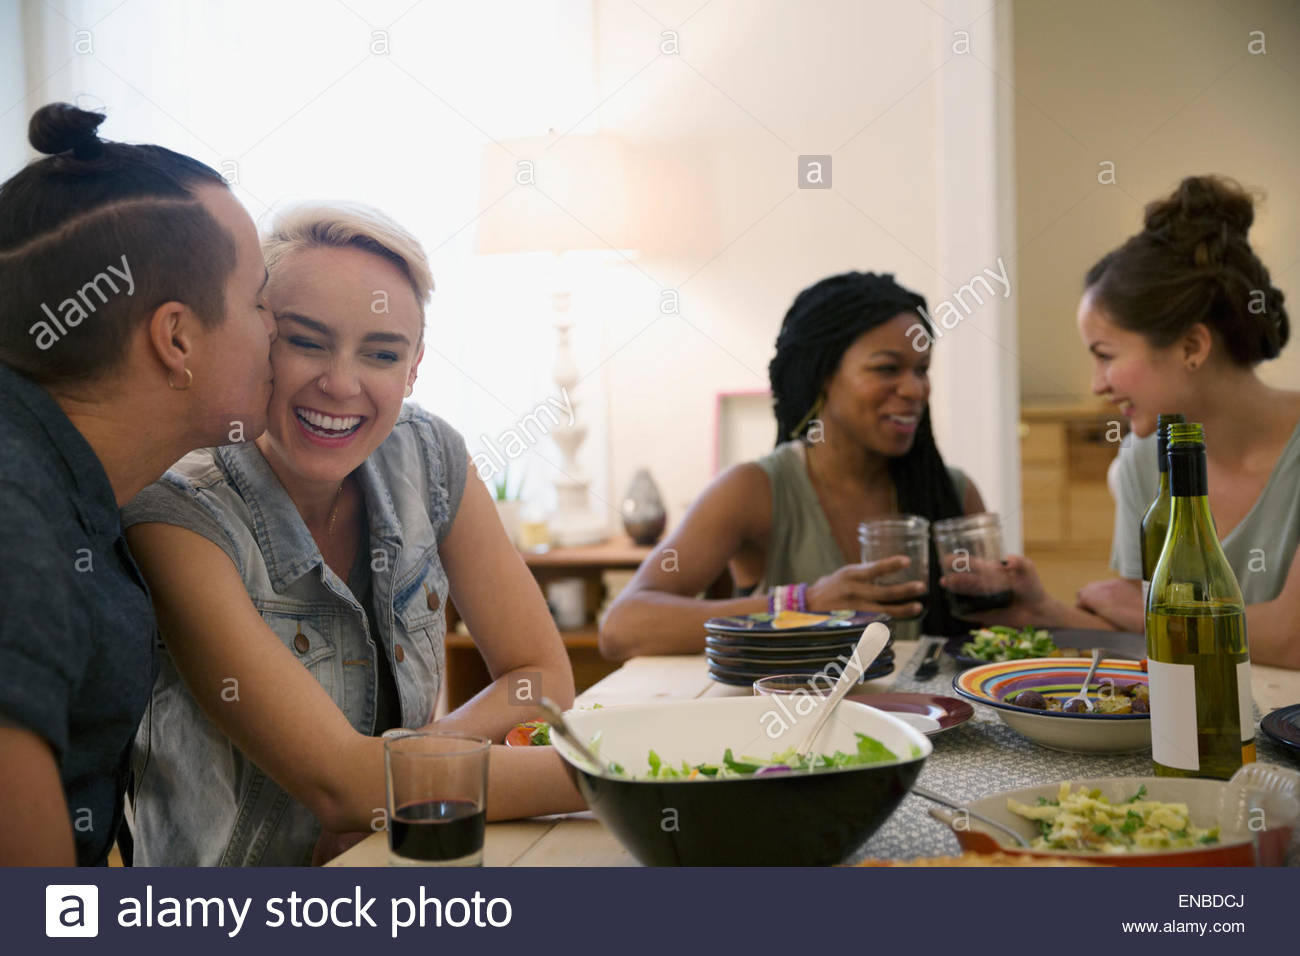 Couple kissing at dinner party Stock Photo